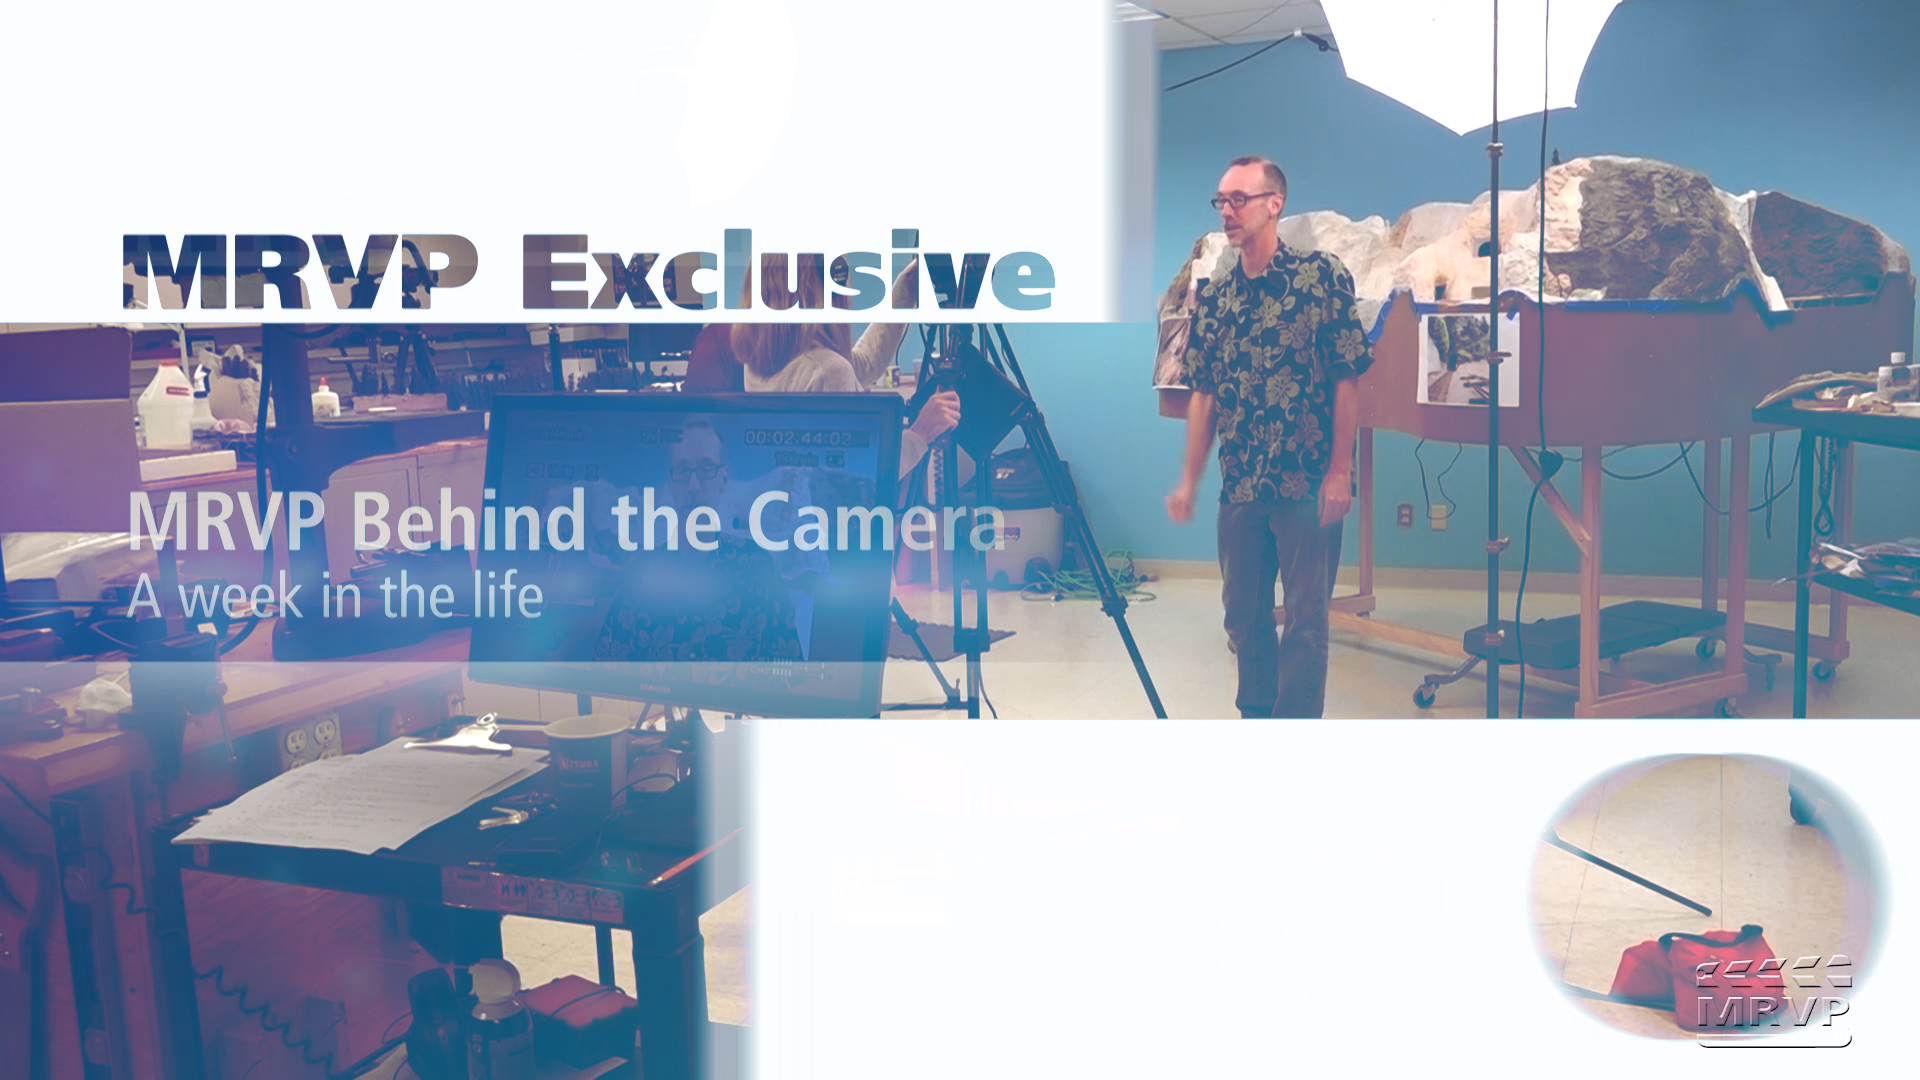 MRVP Exclusive: MRVP Behind the Camera